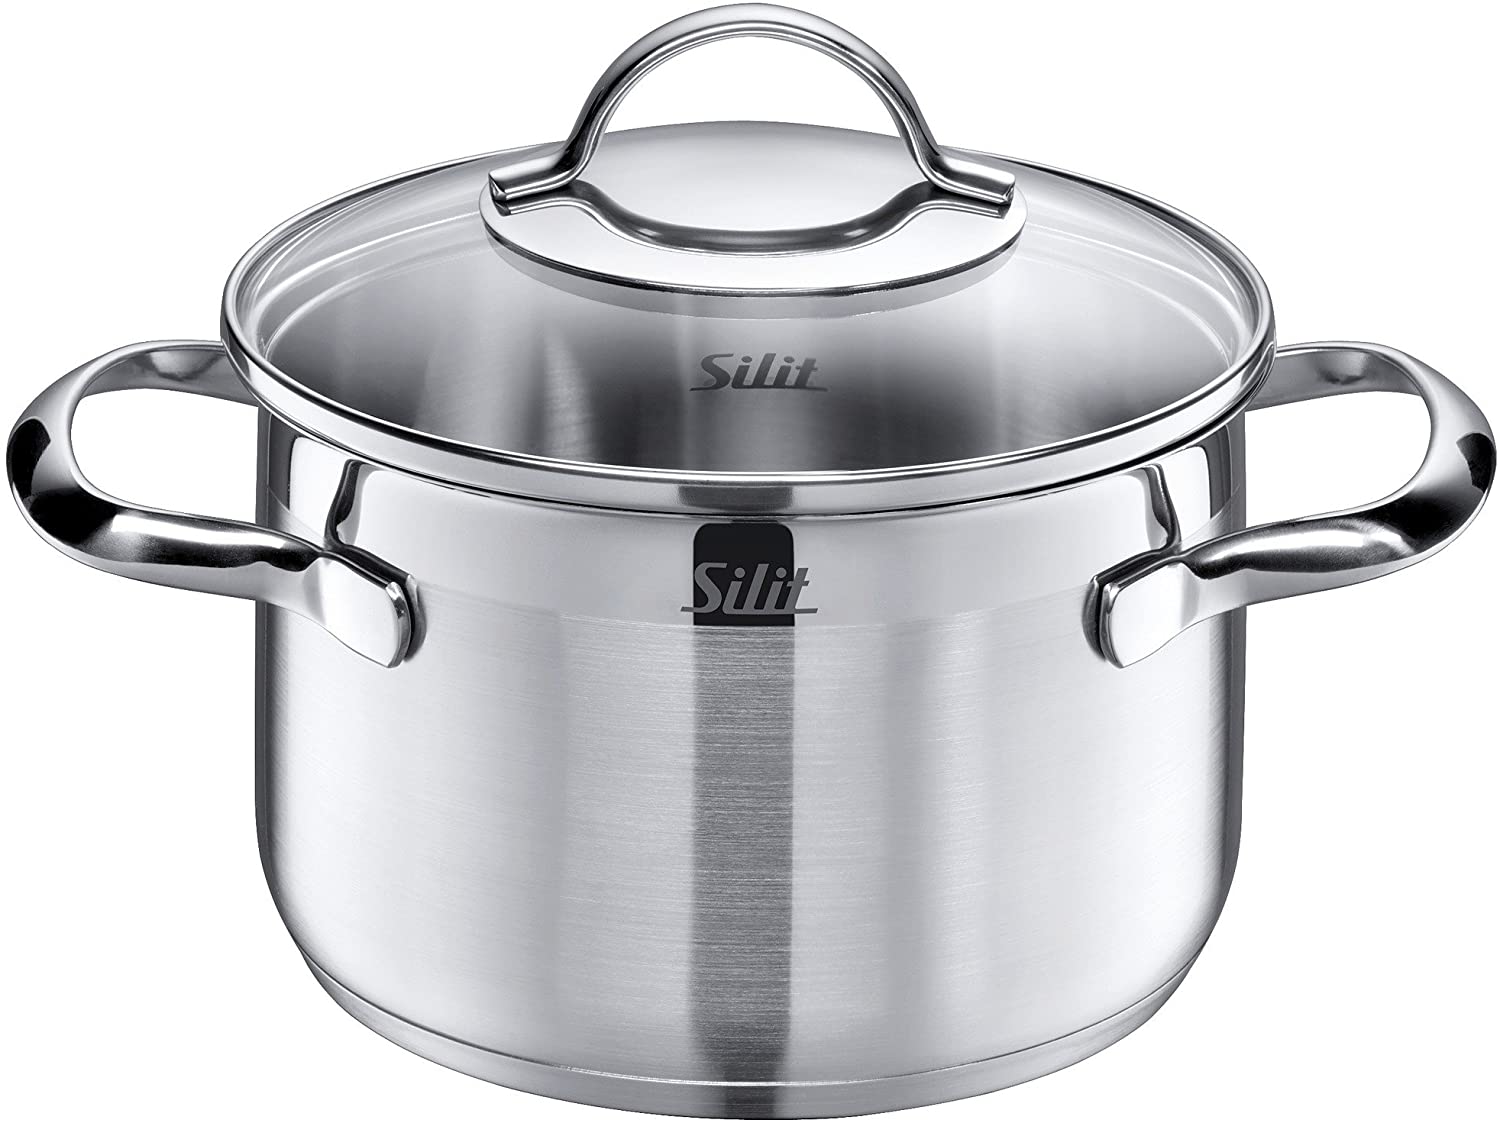 Silit Achat Cooking Pot Small 16 cm Glass Lid Induction 1.9 L Stainless Steel Partially Matted Uncoated Oven Safe